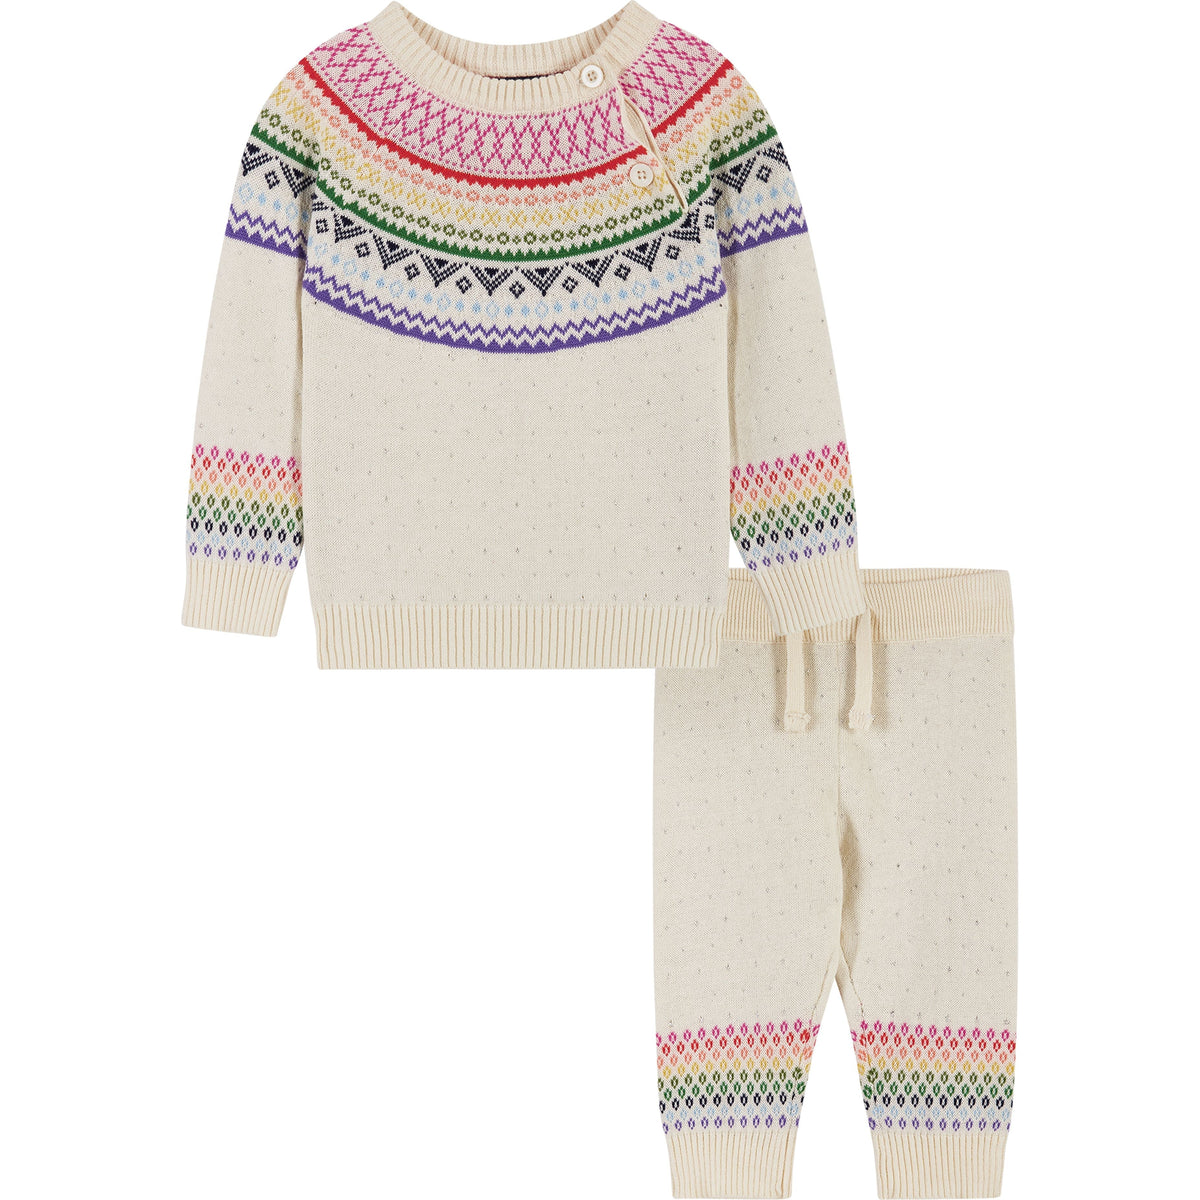 Andy & Evan Holiday Infant Cream Sweater Set